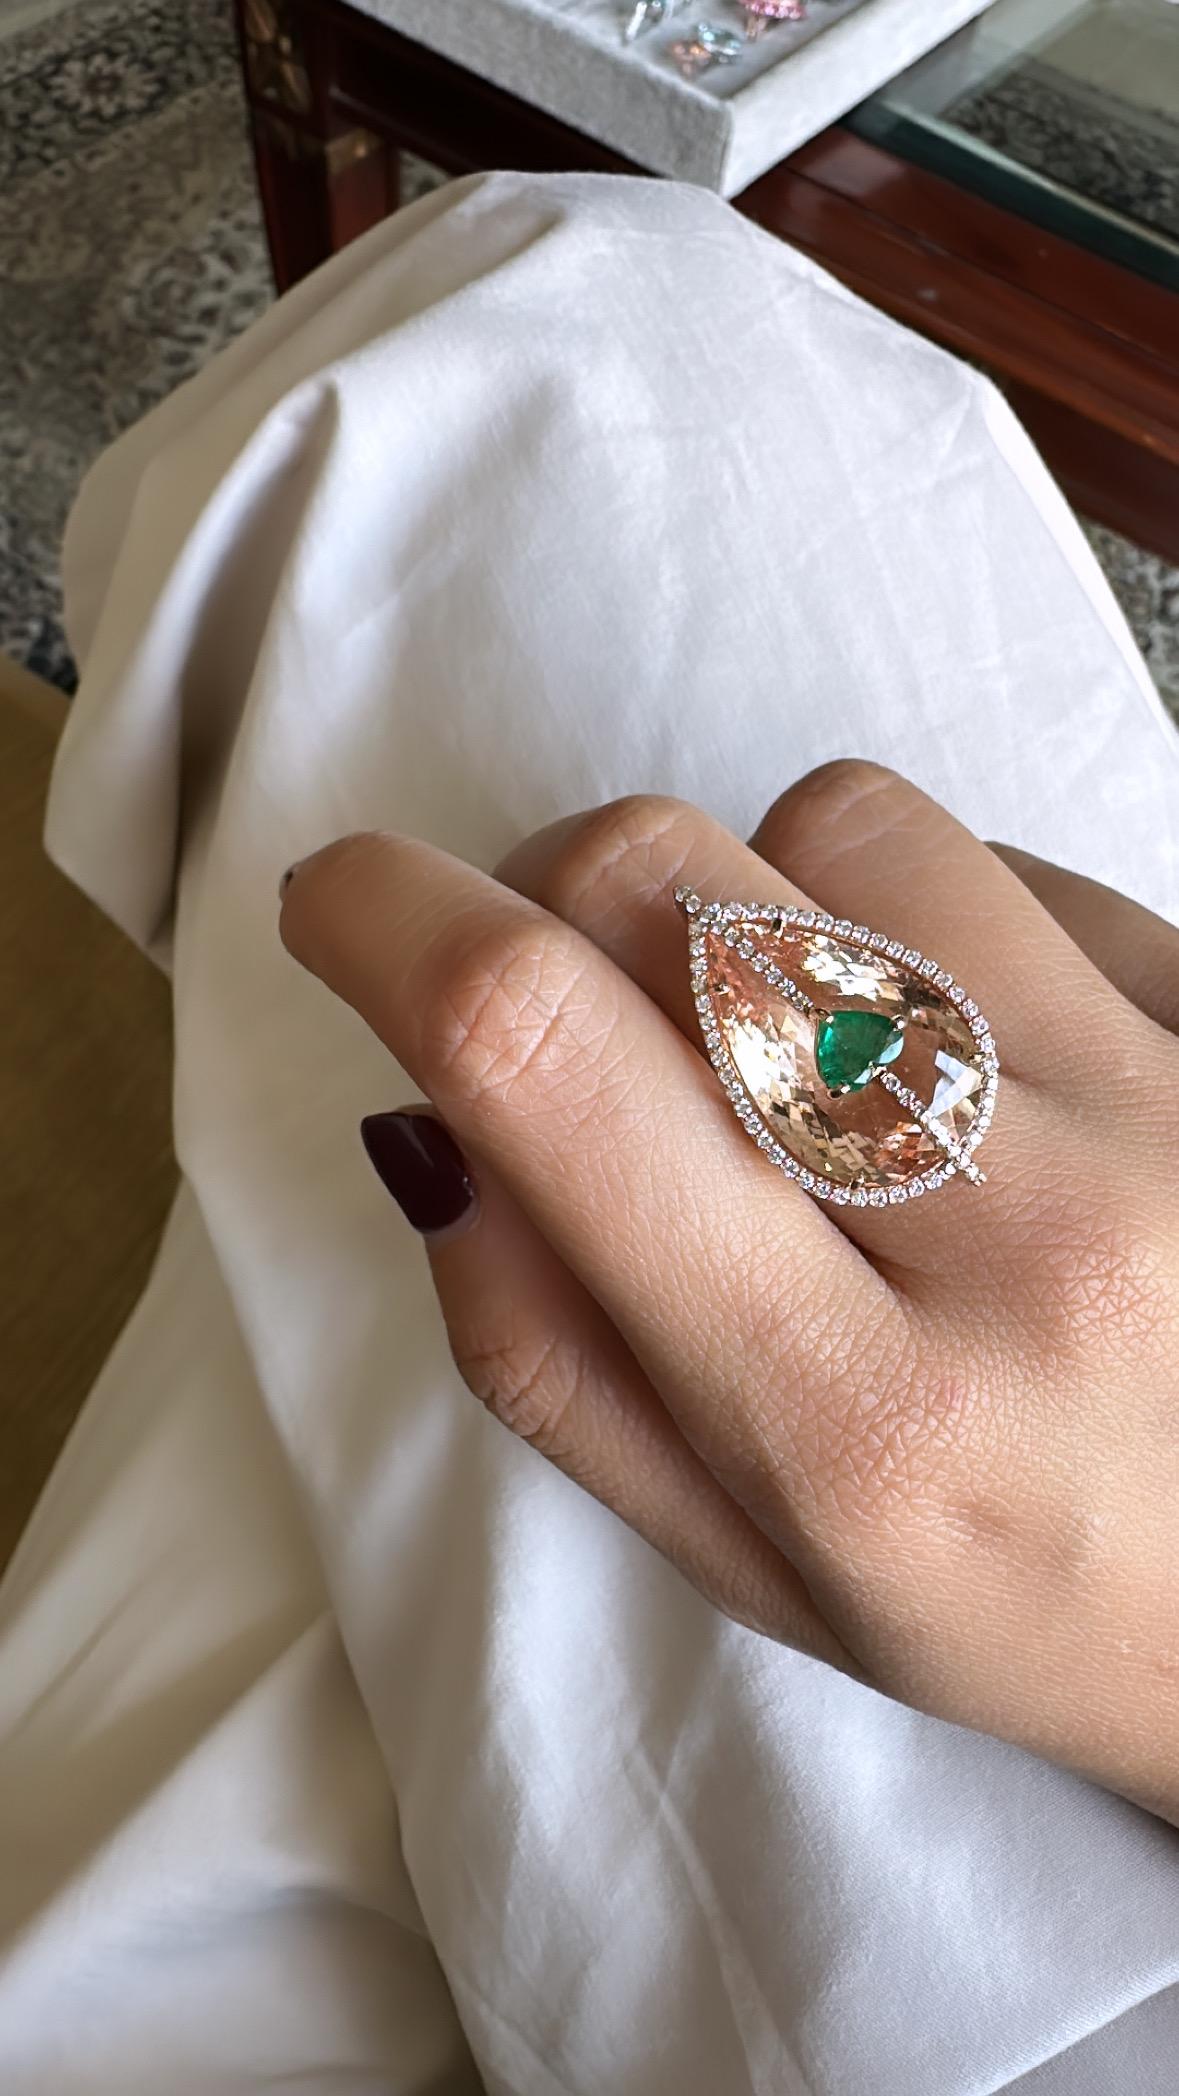 Set in 18K Gold, 21.25 carats Morganite, Zambian Emerald & Diamond Cocktail Ring For Sale 3